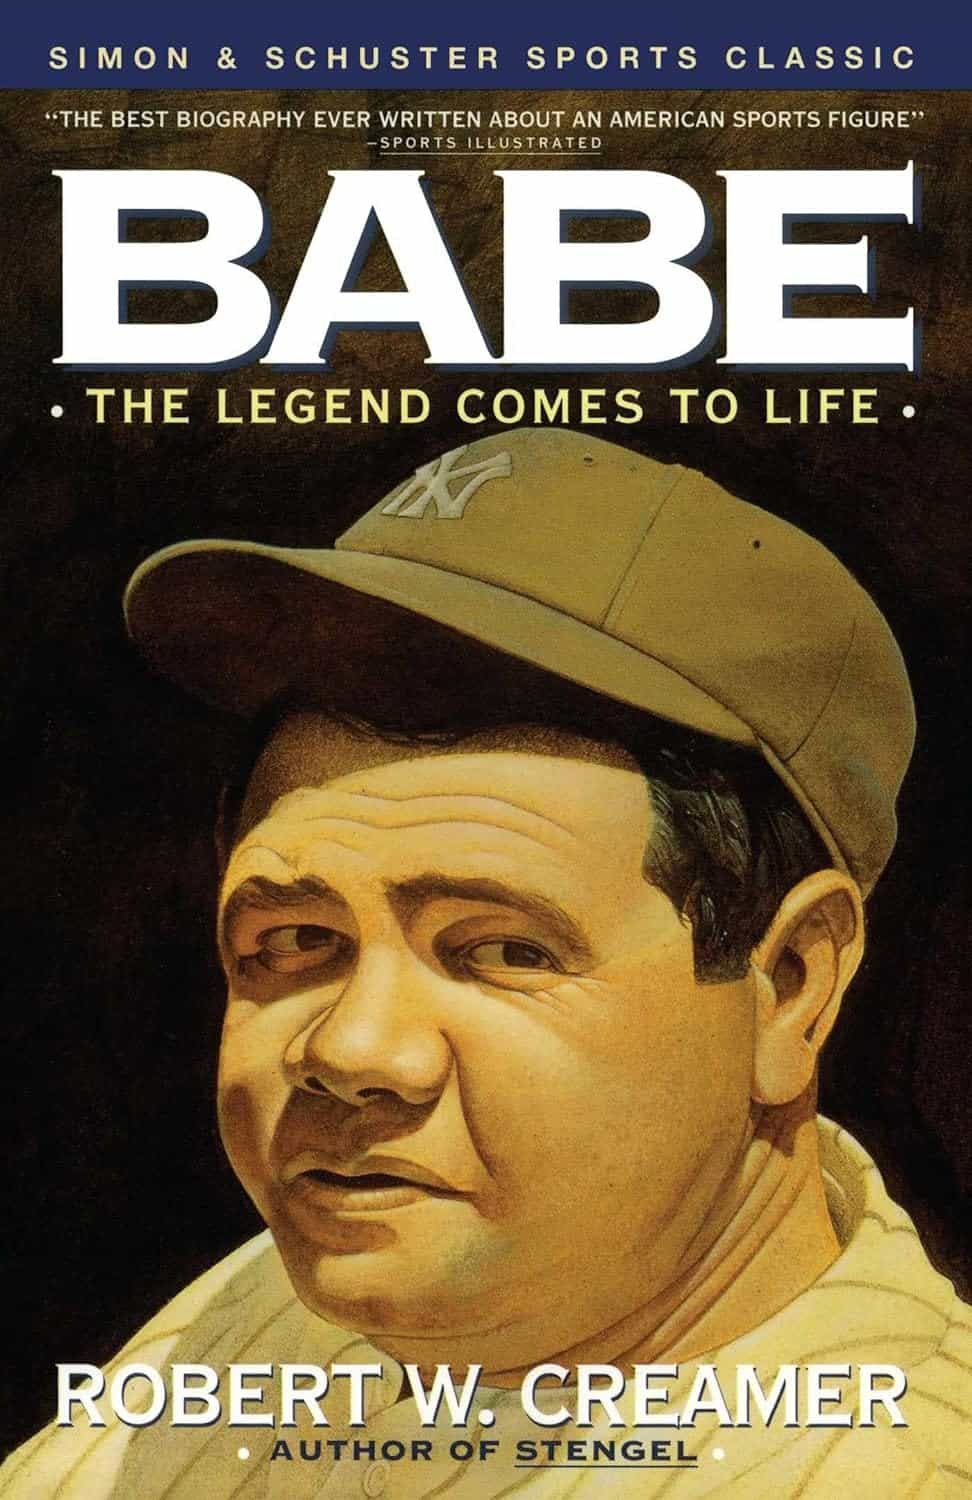 Babe: The Legend Comes to Life, by Robert Creamer